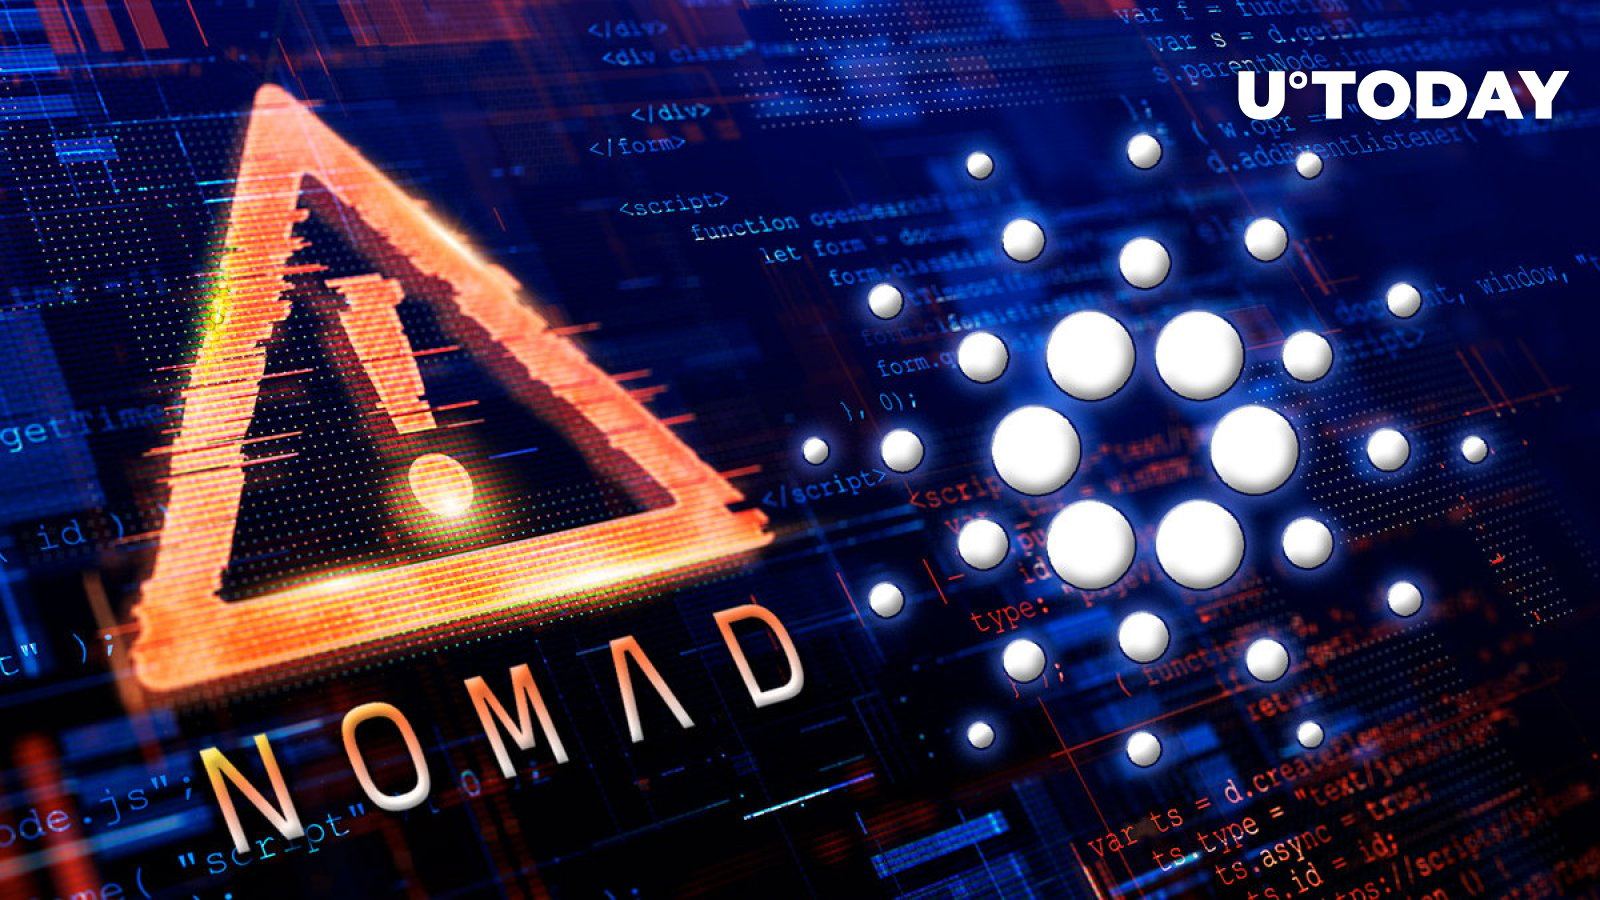 Cardano Users Indirectly Impacted by Nomad Hack: Details